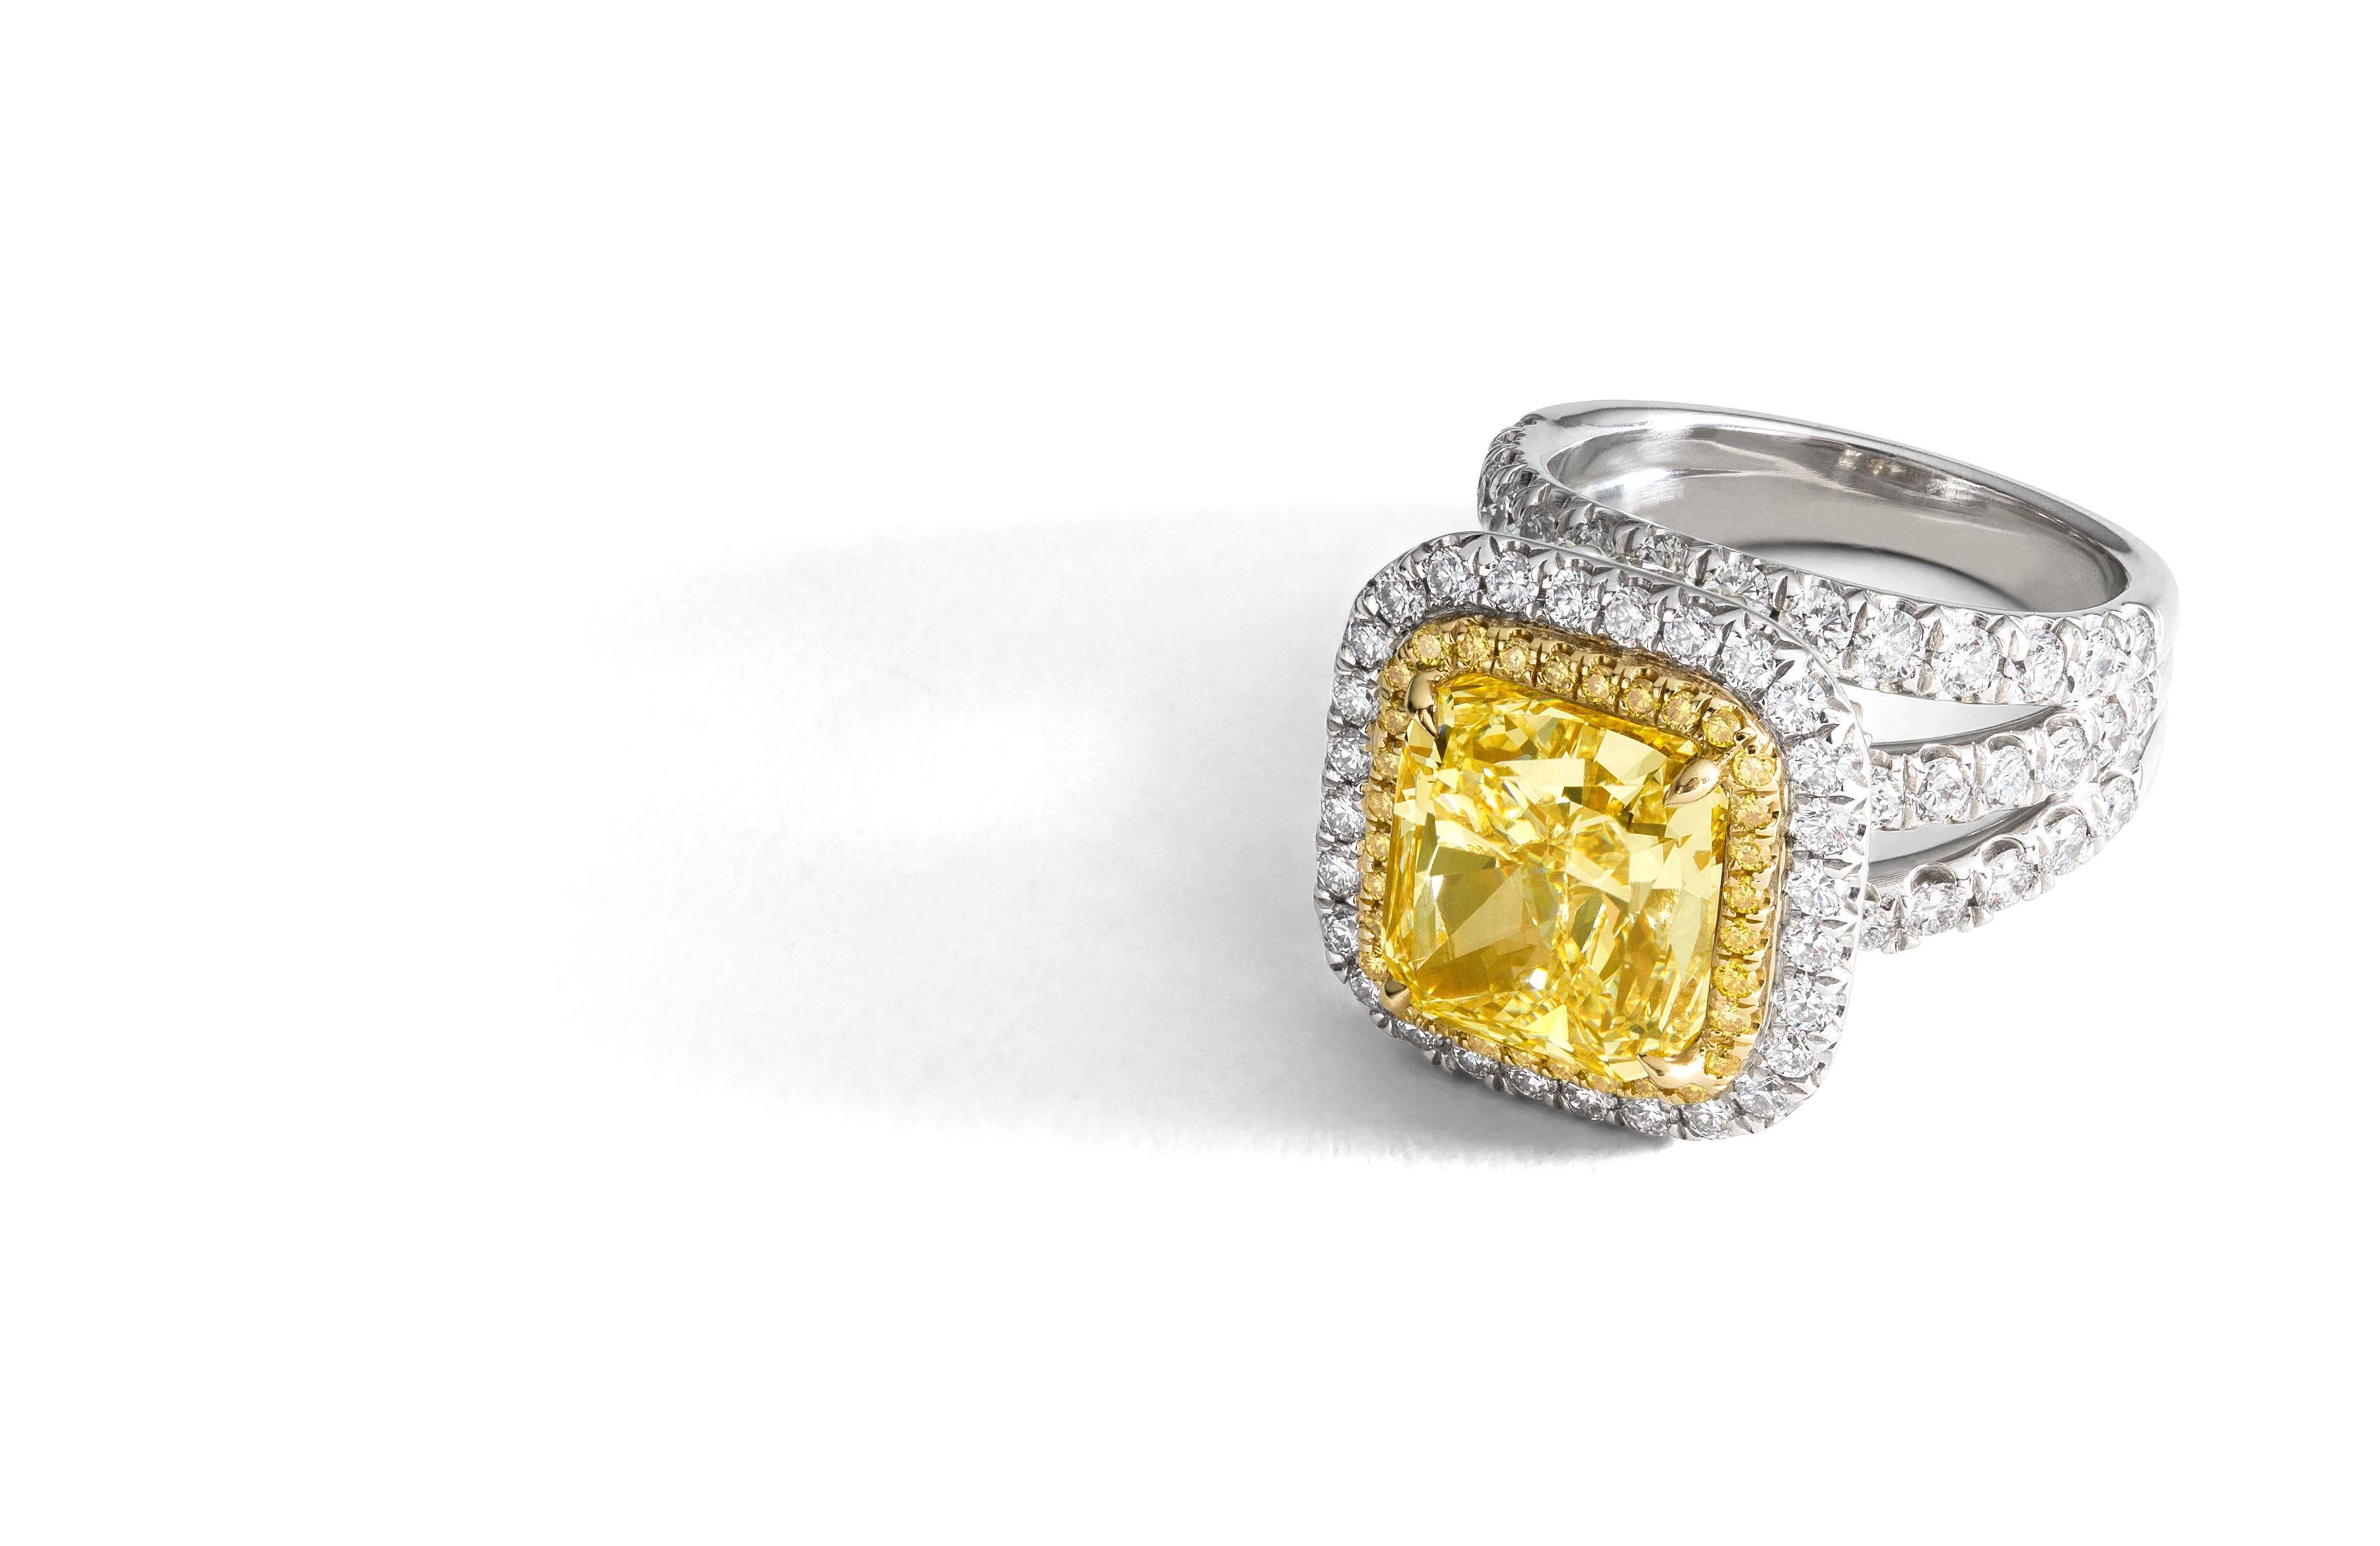 This mesmerizing and stunning ring features a rare 6.30 carat radiant-cut Fancy Light Yellow diamond surrounded by Fancy Yellow diamonds, and round brilliant and pear-shaped white diamonds. Set in platinum and 18K gold, the center stone is GIA